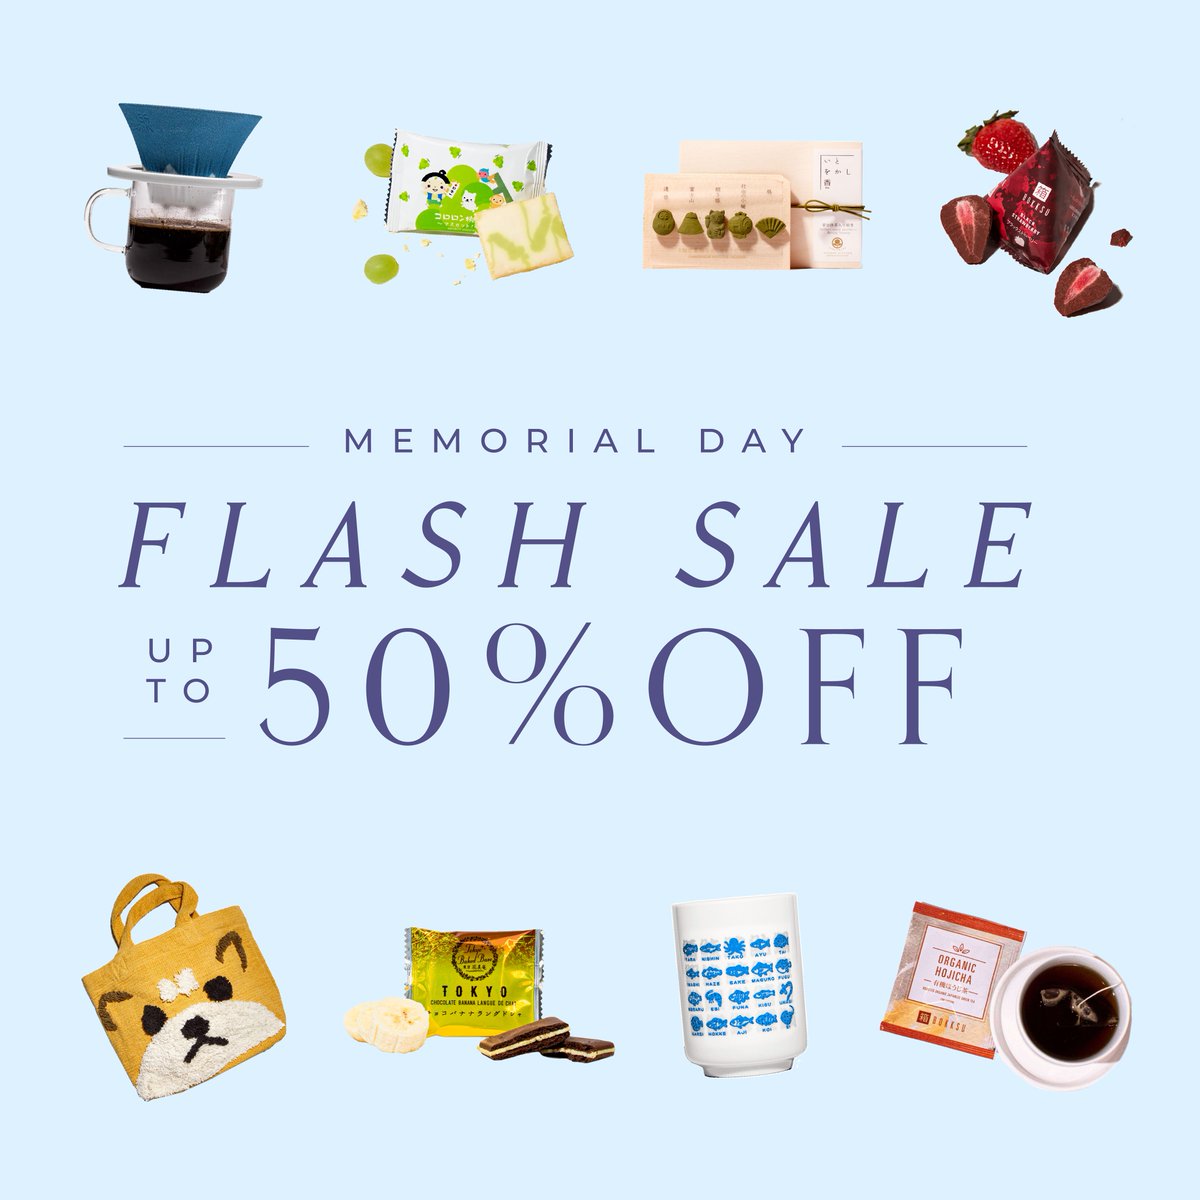 This Memorial Day Weekend, hundreds of your favorite Japanese snacks, teas, pantry items, home goods, and toys are up to 50% off! Once we sell out they’re gone for good so shop now to get yours!